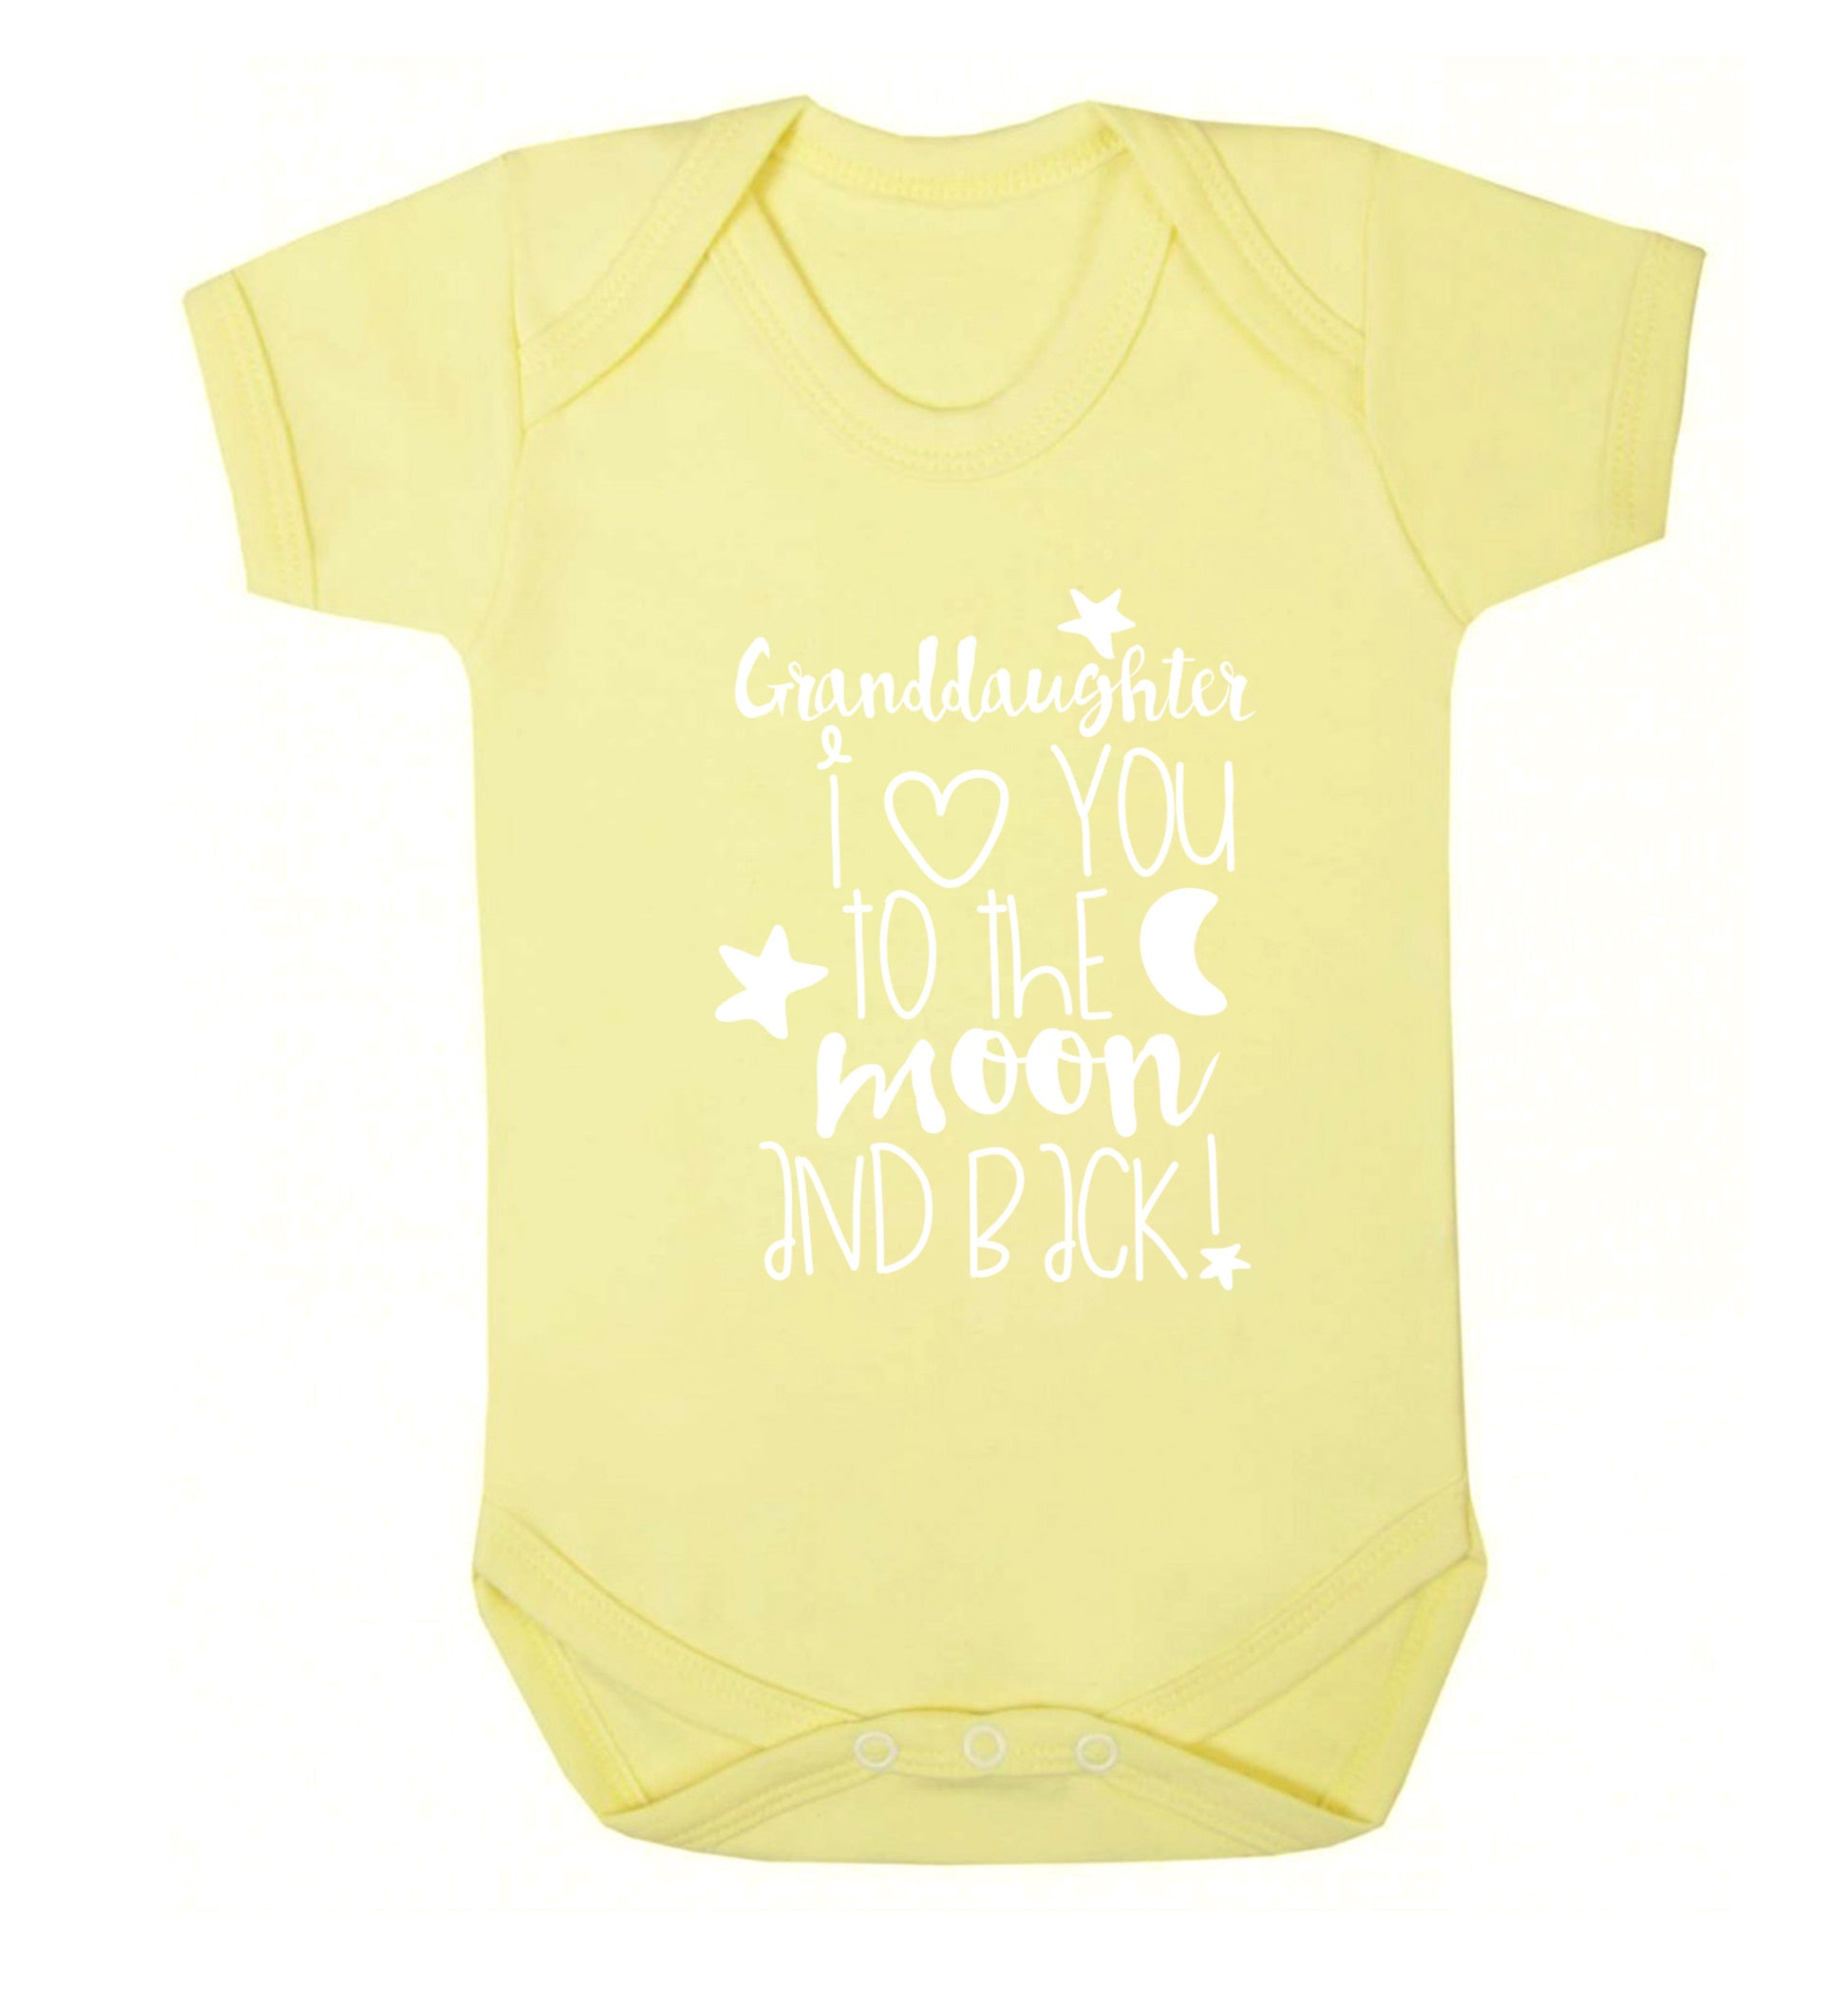 Granddaughter I love you to the moon and back Baby Vest pale yellow 18-24 months